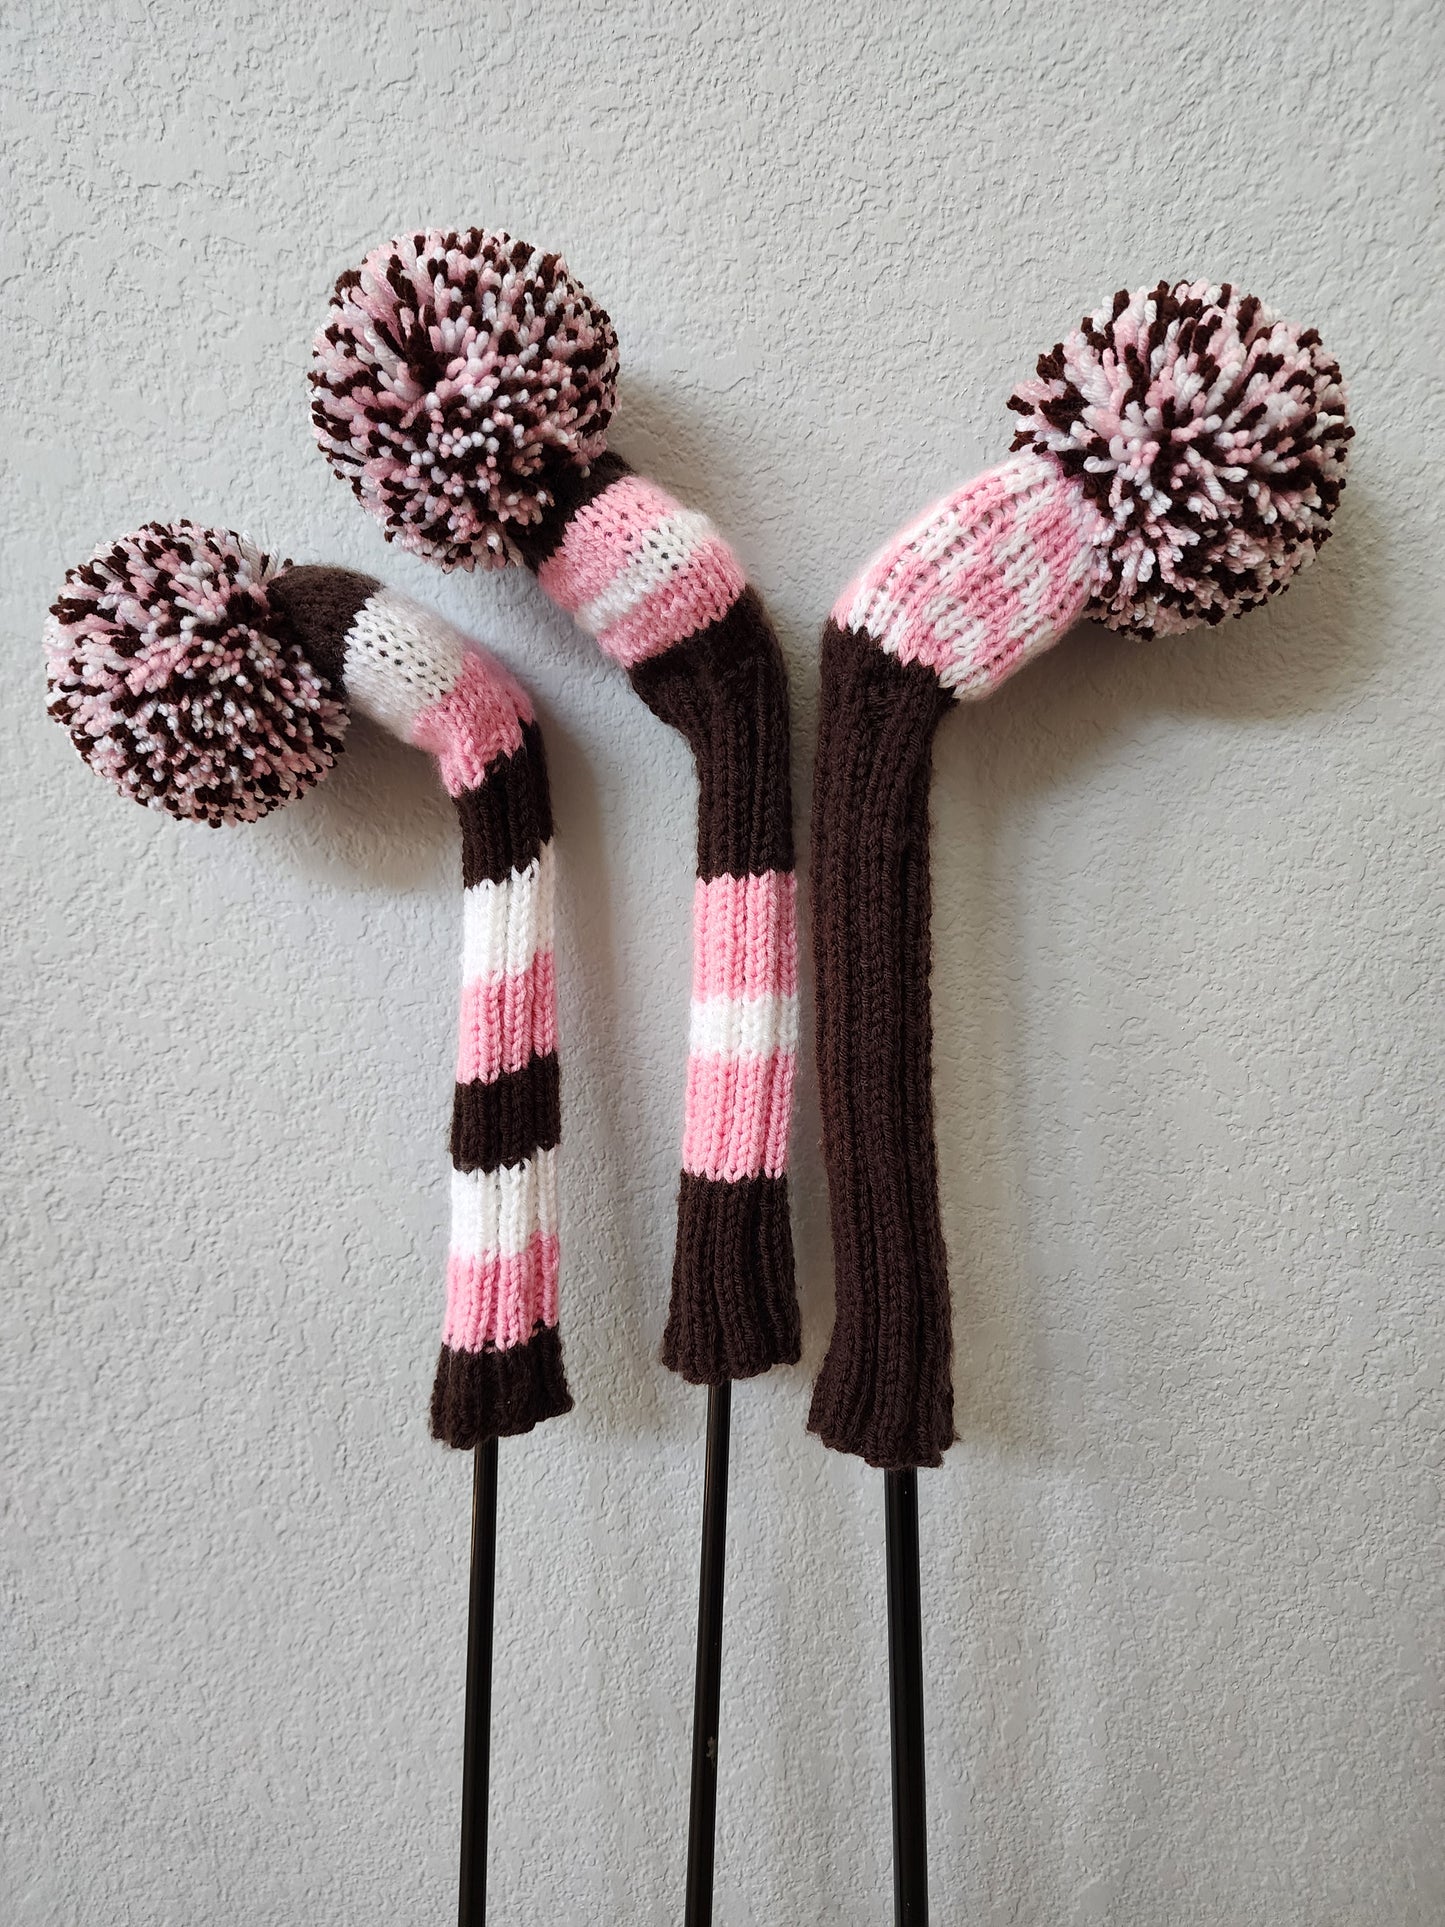 Golf Club Head Covers Set of 3 Retro-Vintage Brown, Pink & White with Pom Poms for Drivers, Woods